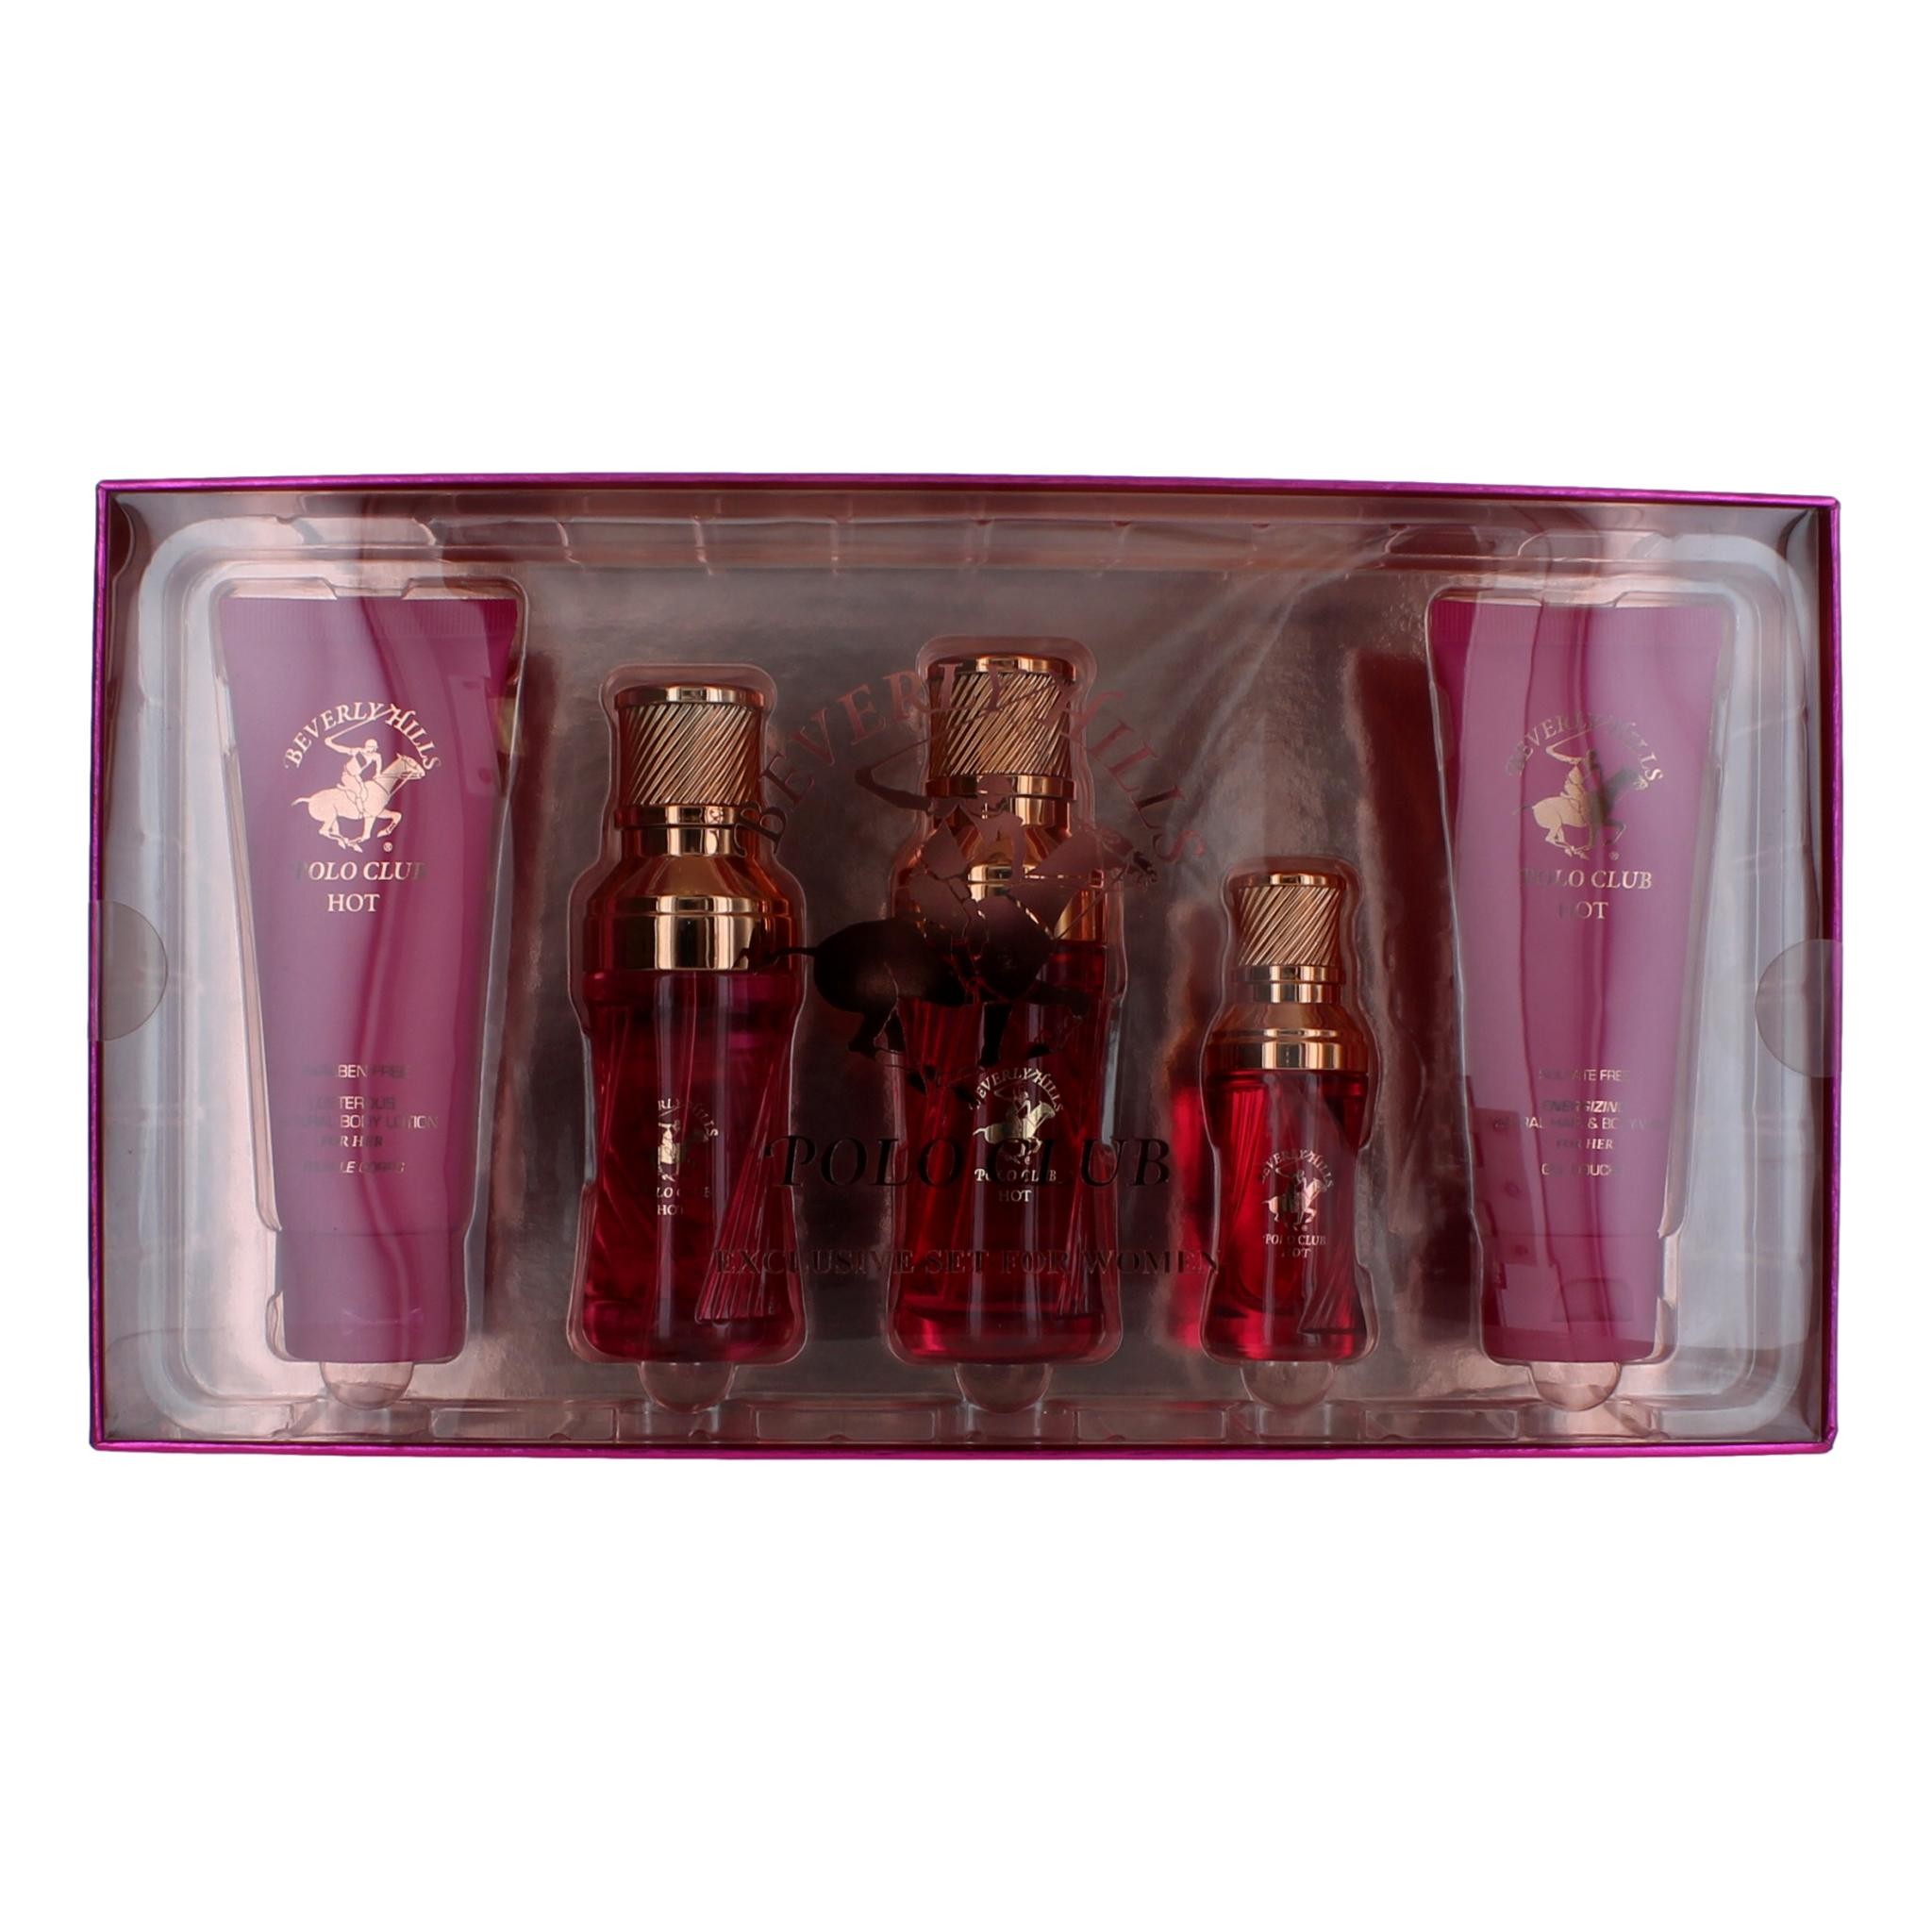 Beverly Hills Polo Club BHPC Hot by Beverly Hills Polo Club, 5 Piece Gift Set for Women 